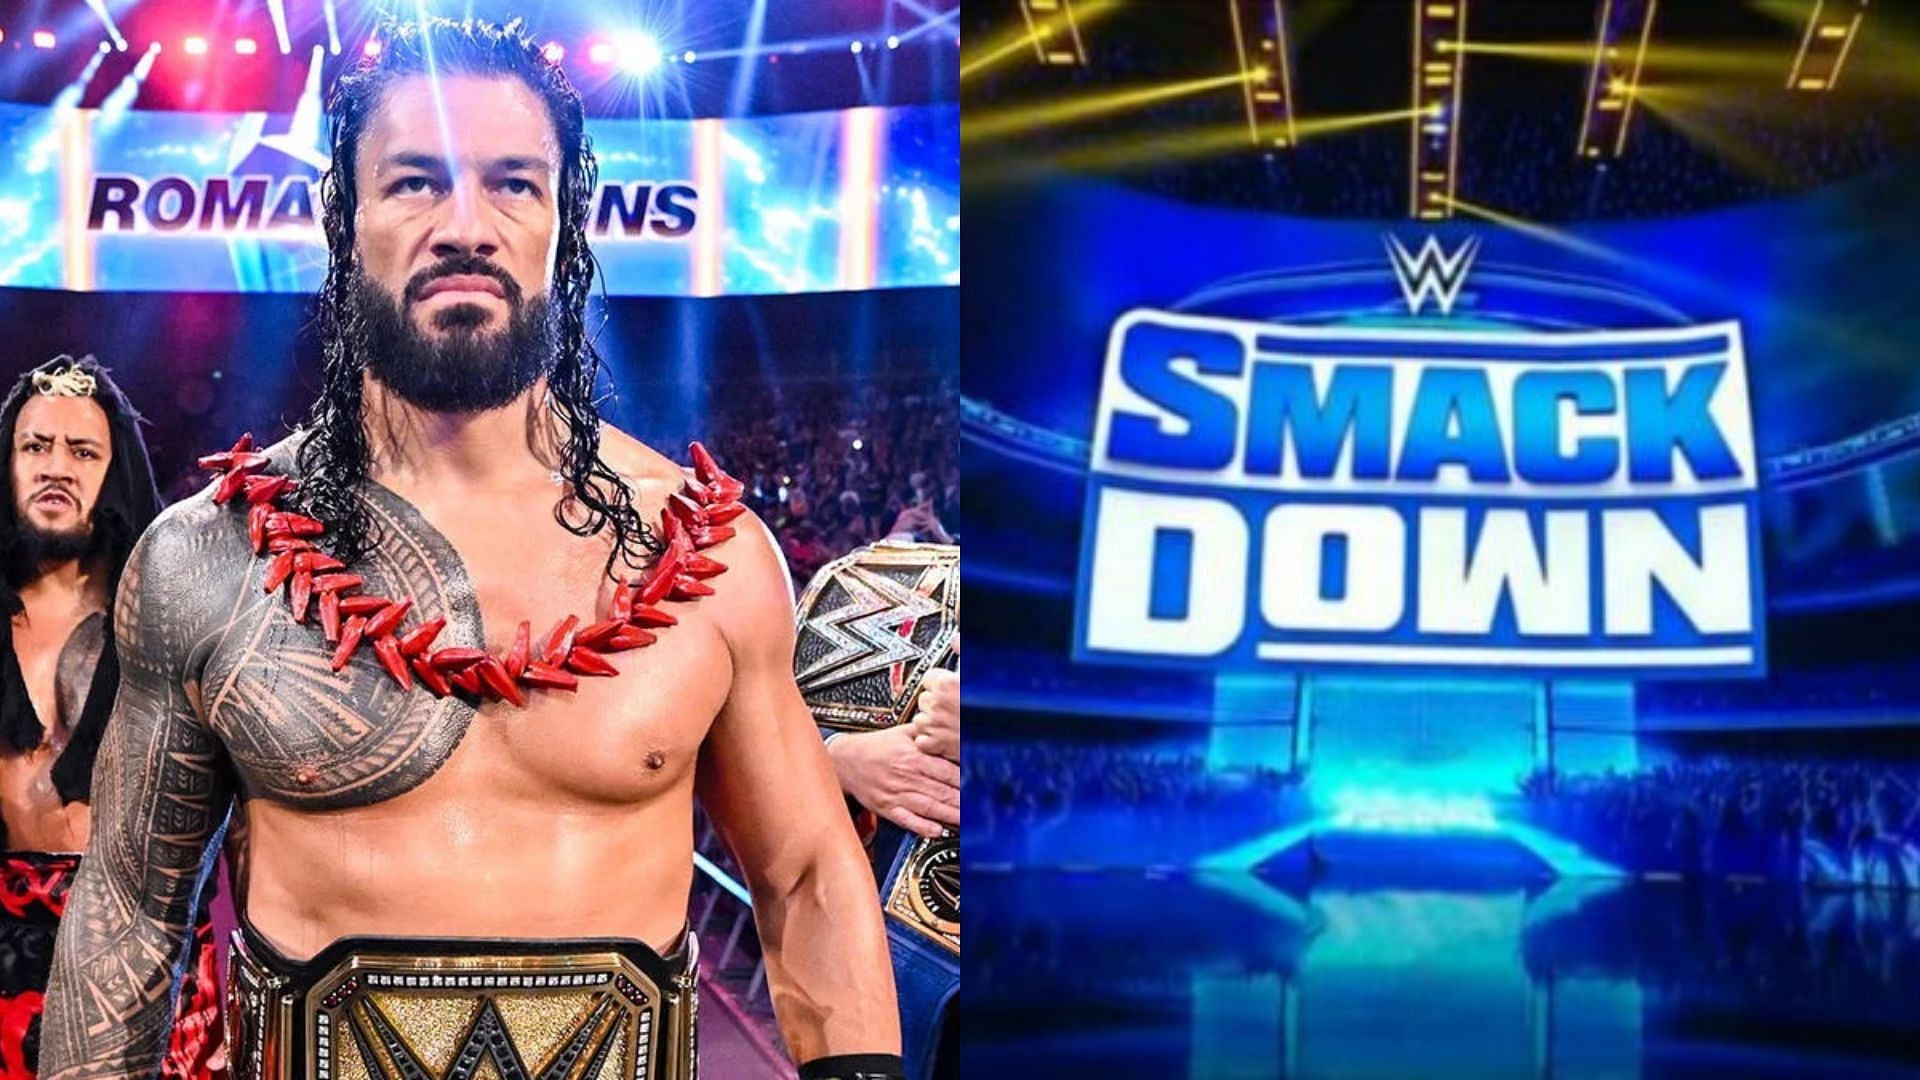 Roman Reigns is set to to return to WWE SmackDown